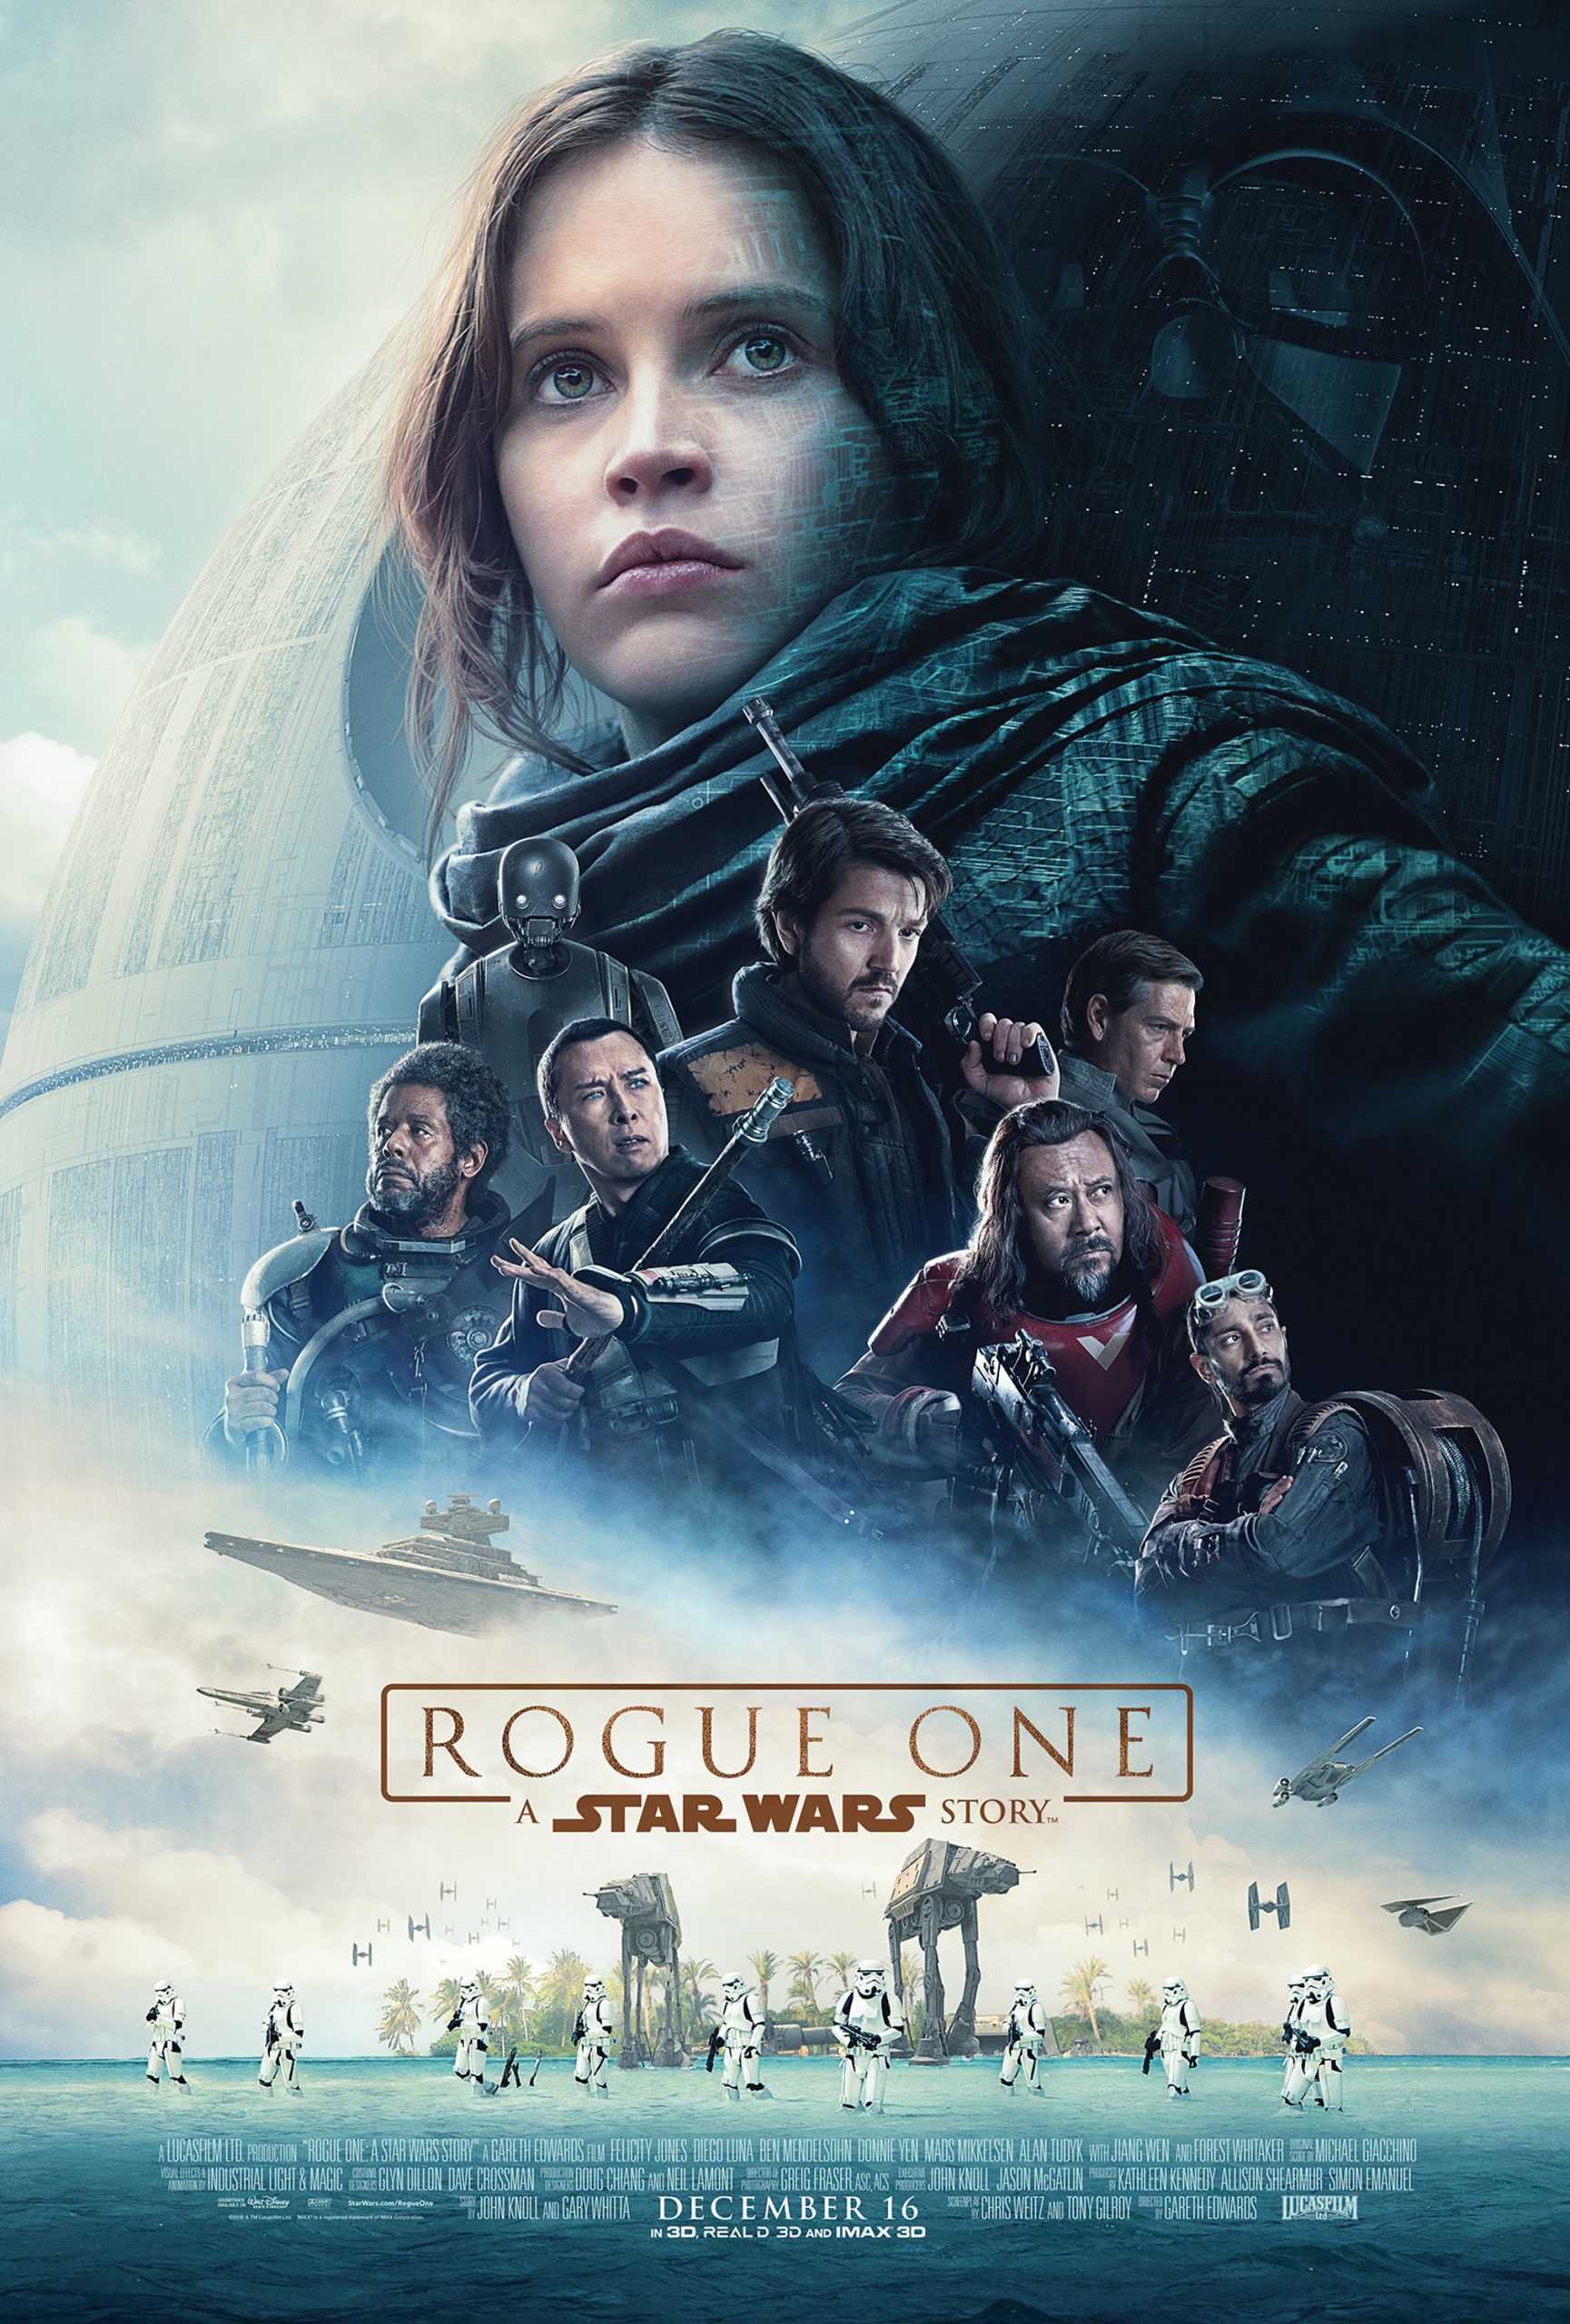 Rogue One: A Star Wars Story. (Walt Disney Motion Pictures)